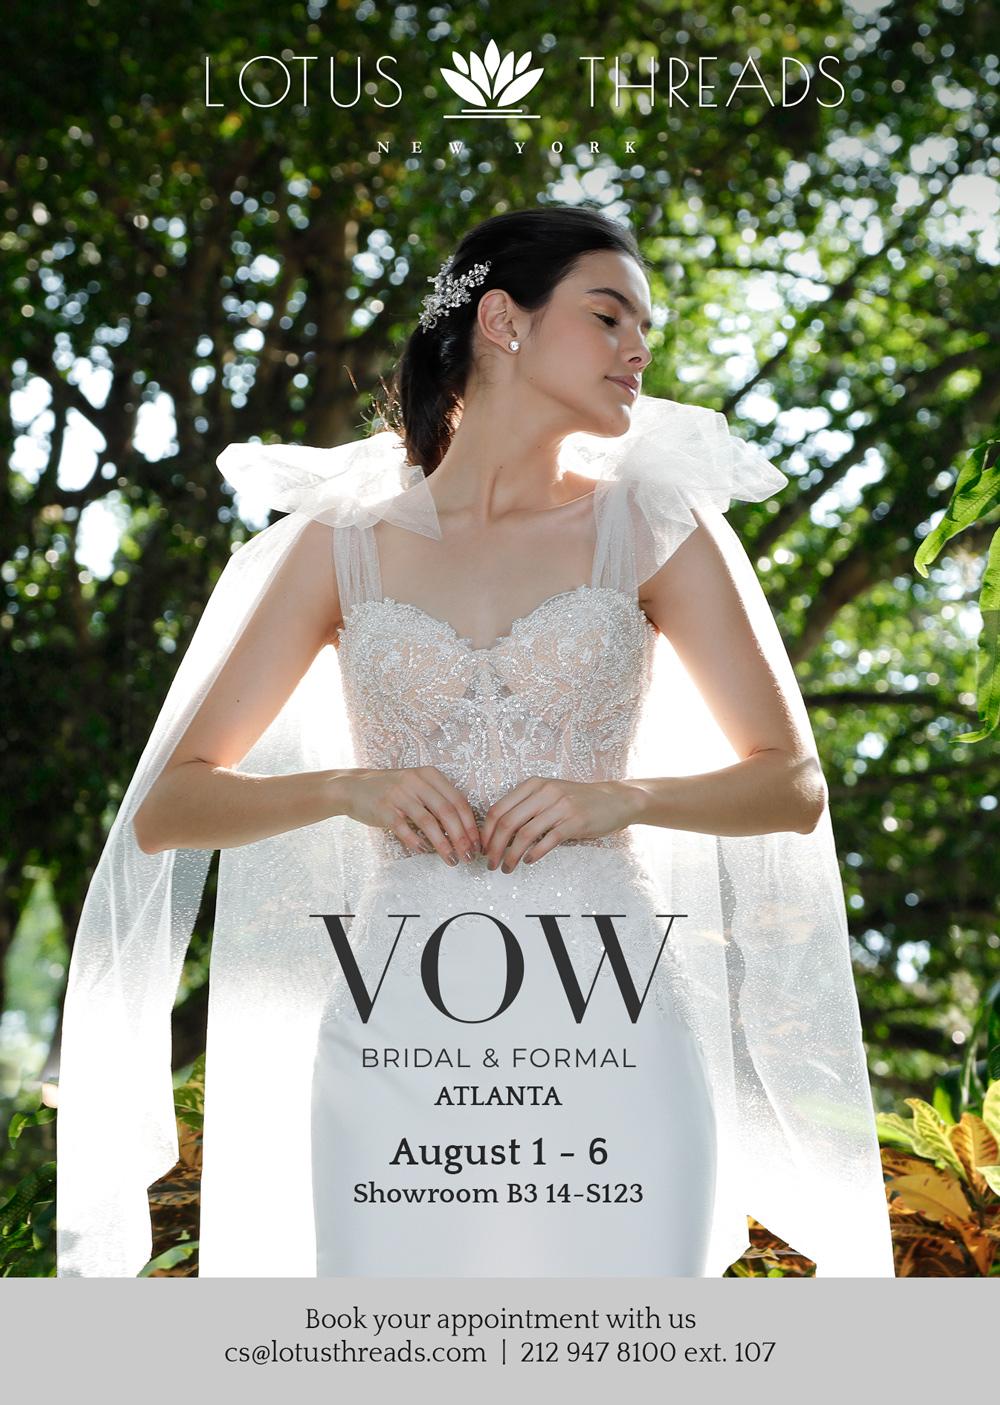 See Contemporary Wedding Gown Designs For Bridal Stores In Atlanta This August